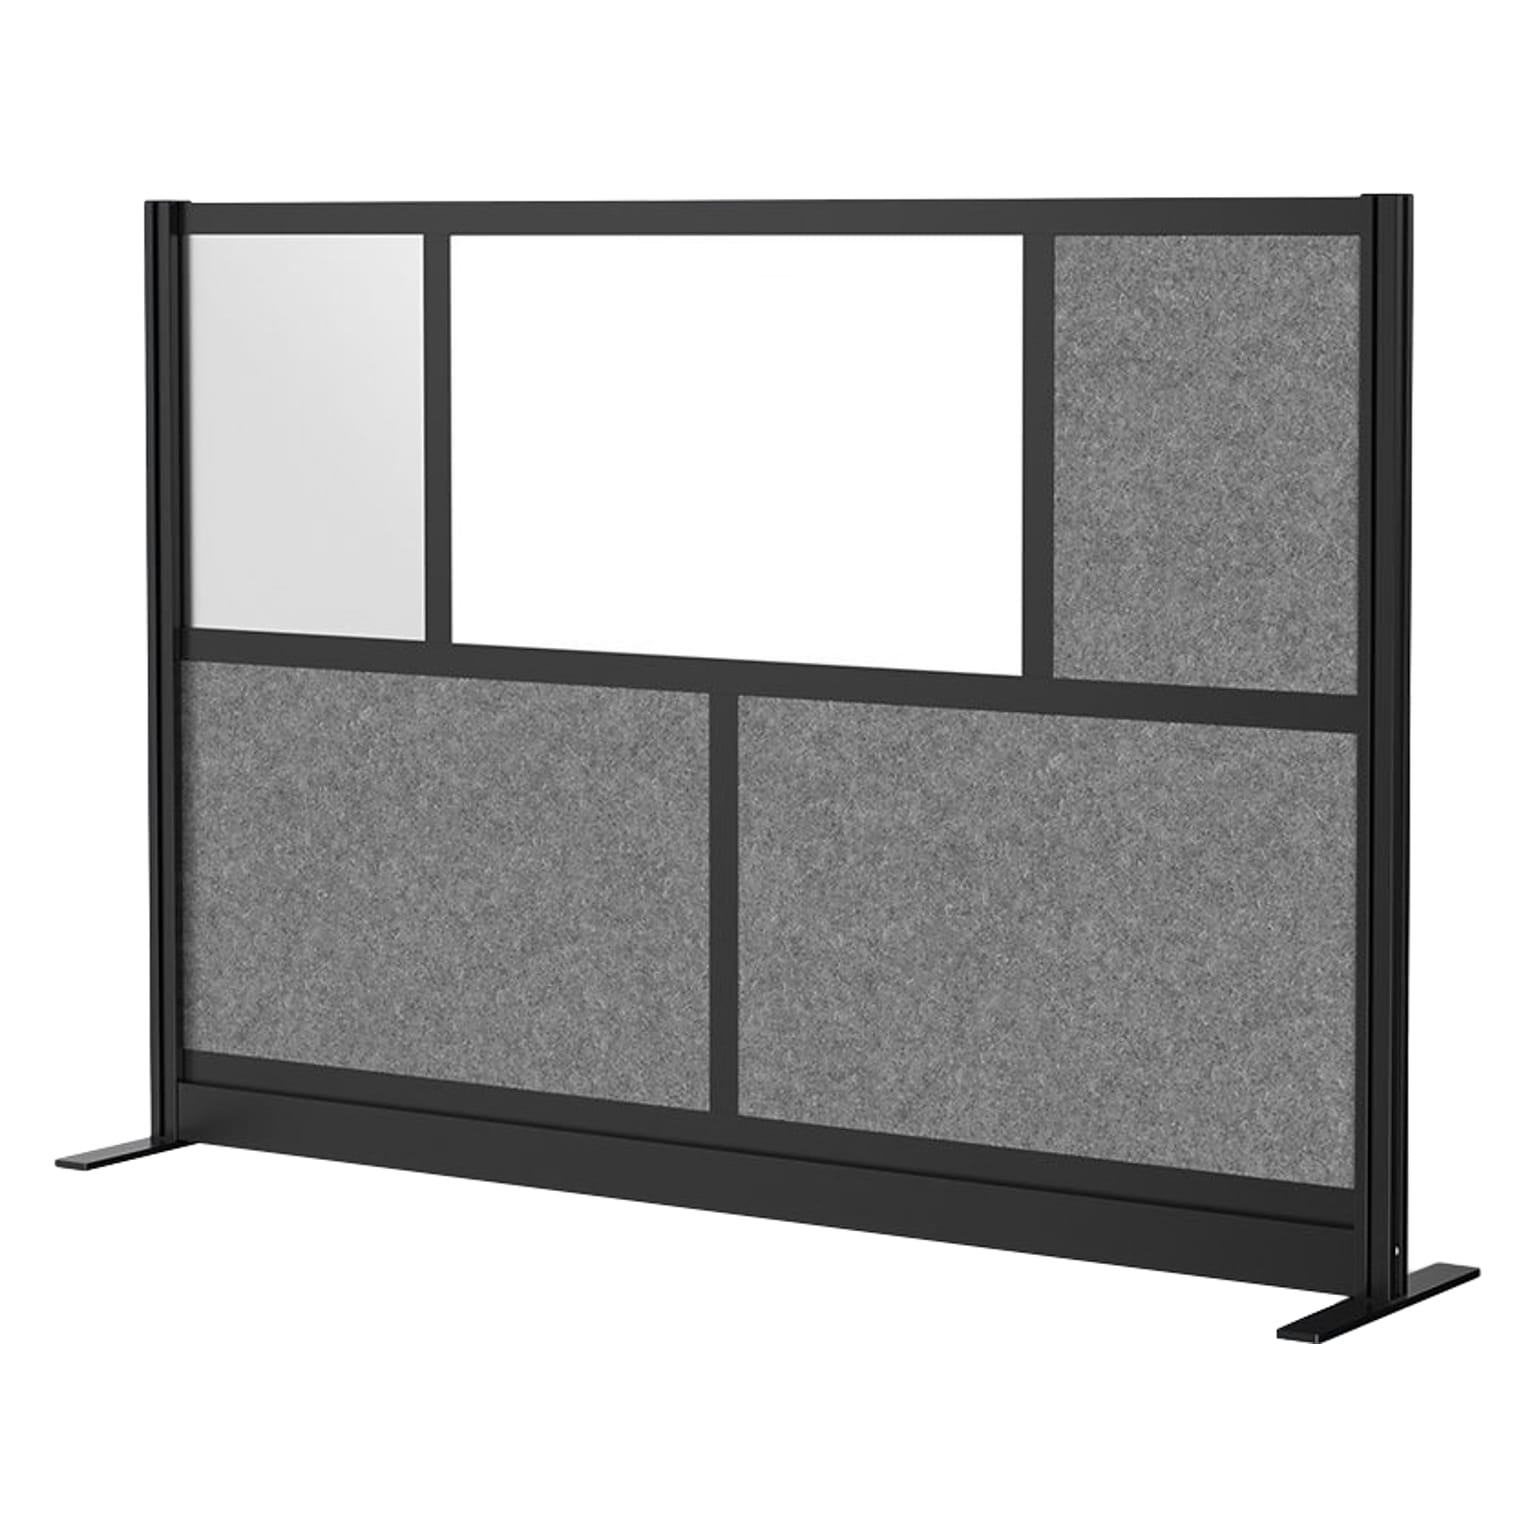 Luxor Workflow Series 5-Panel Freestanding Modular Room Divider System Starter Wall with Whiteboard, 48H x 70W, Black/Gray